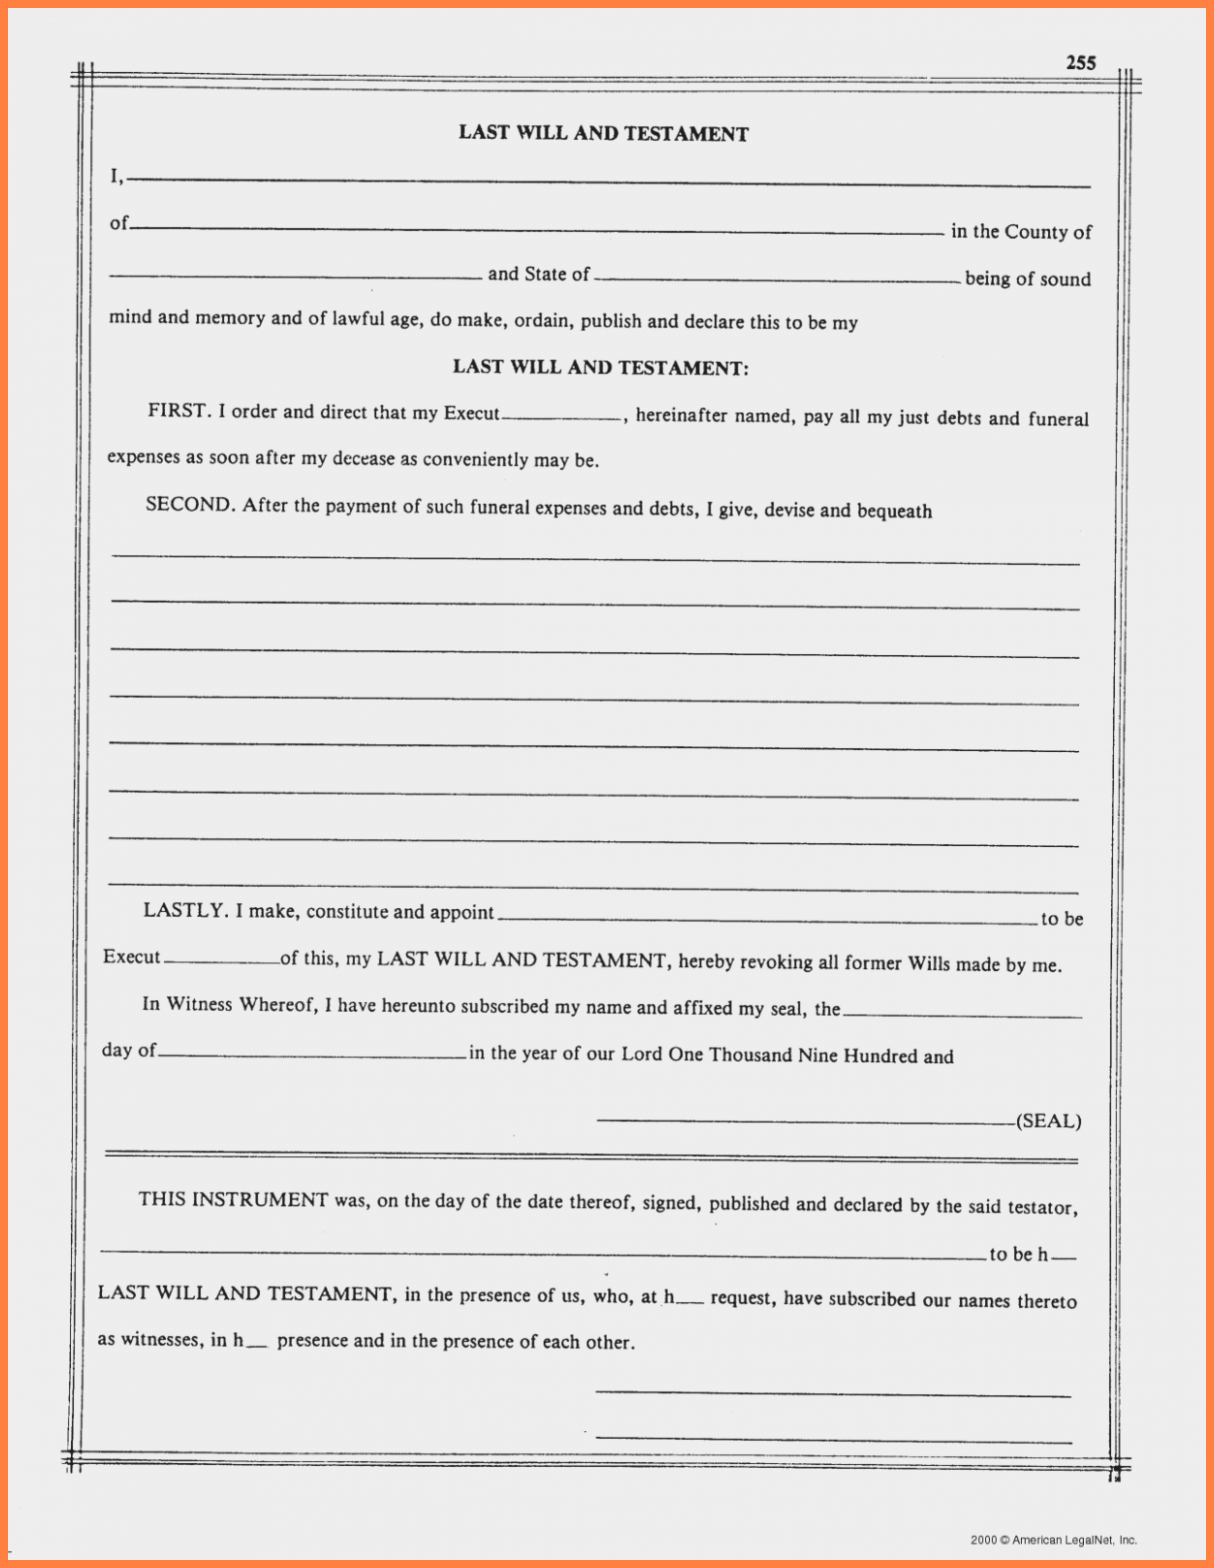 Last Will And Testament Blank Forms.free-Printable-Last-Will-And - Free Printable Last Will And Testament Blank Forms